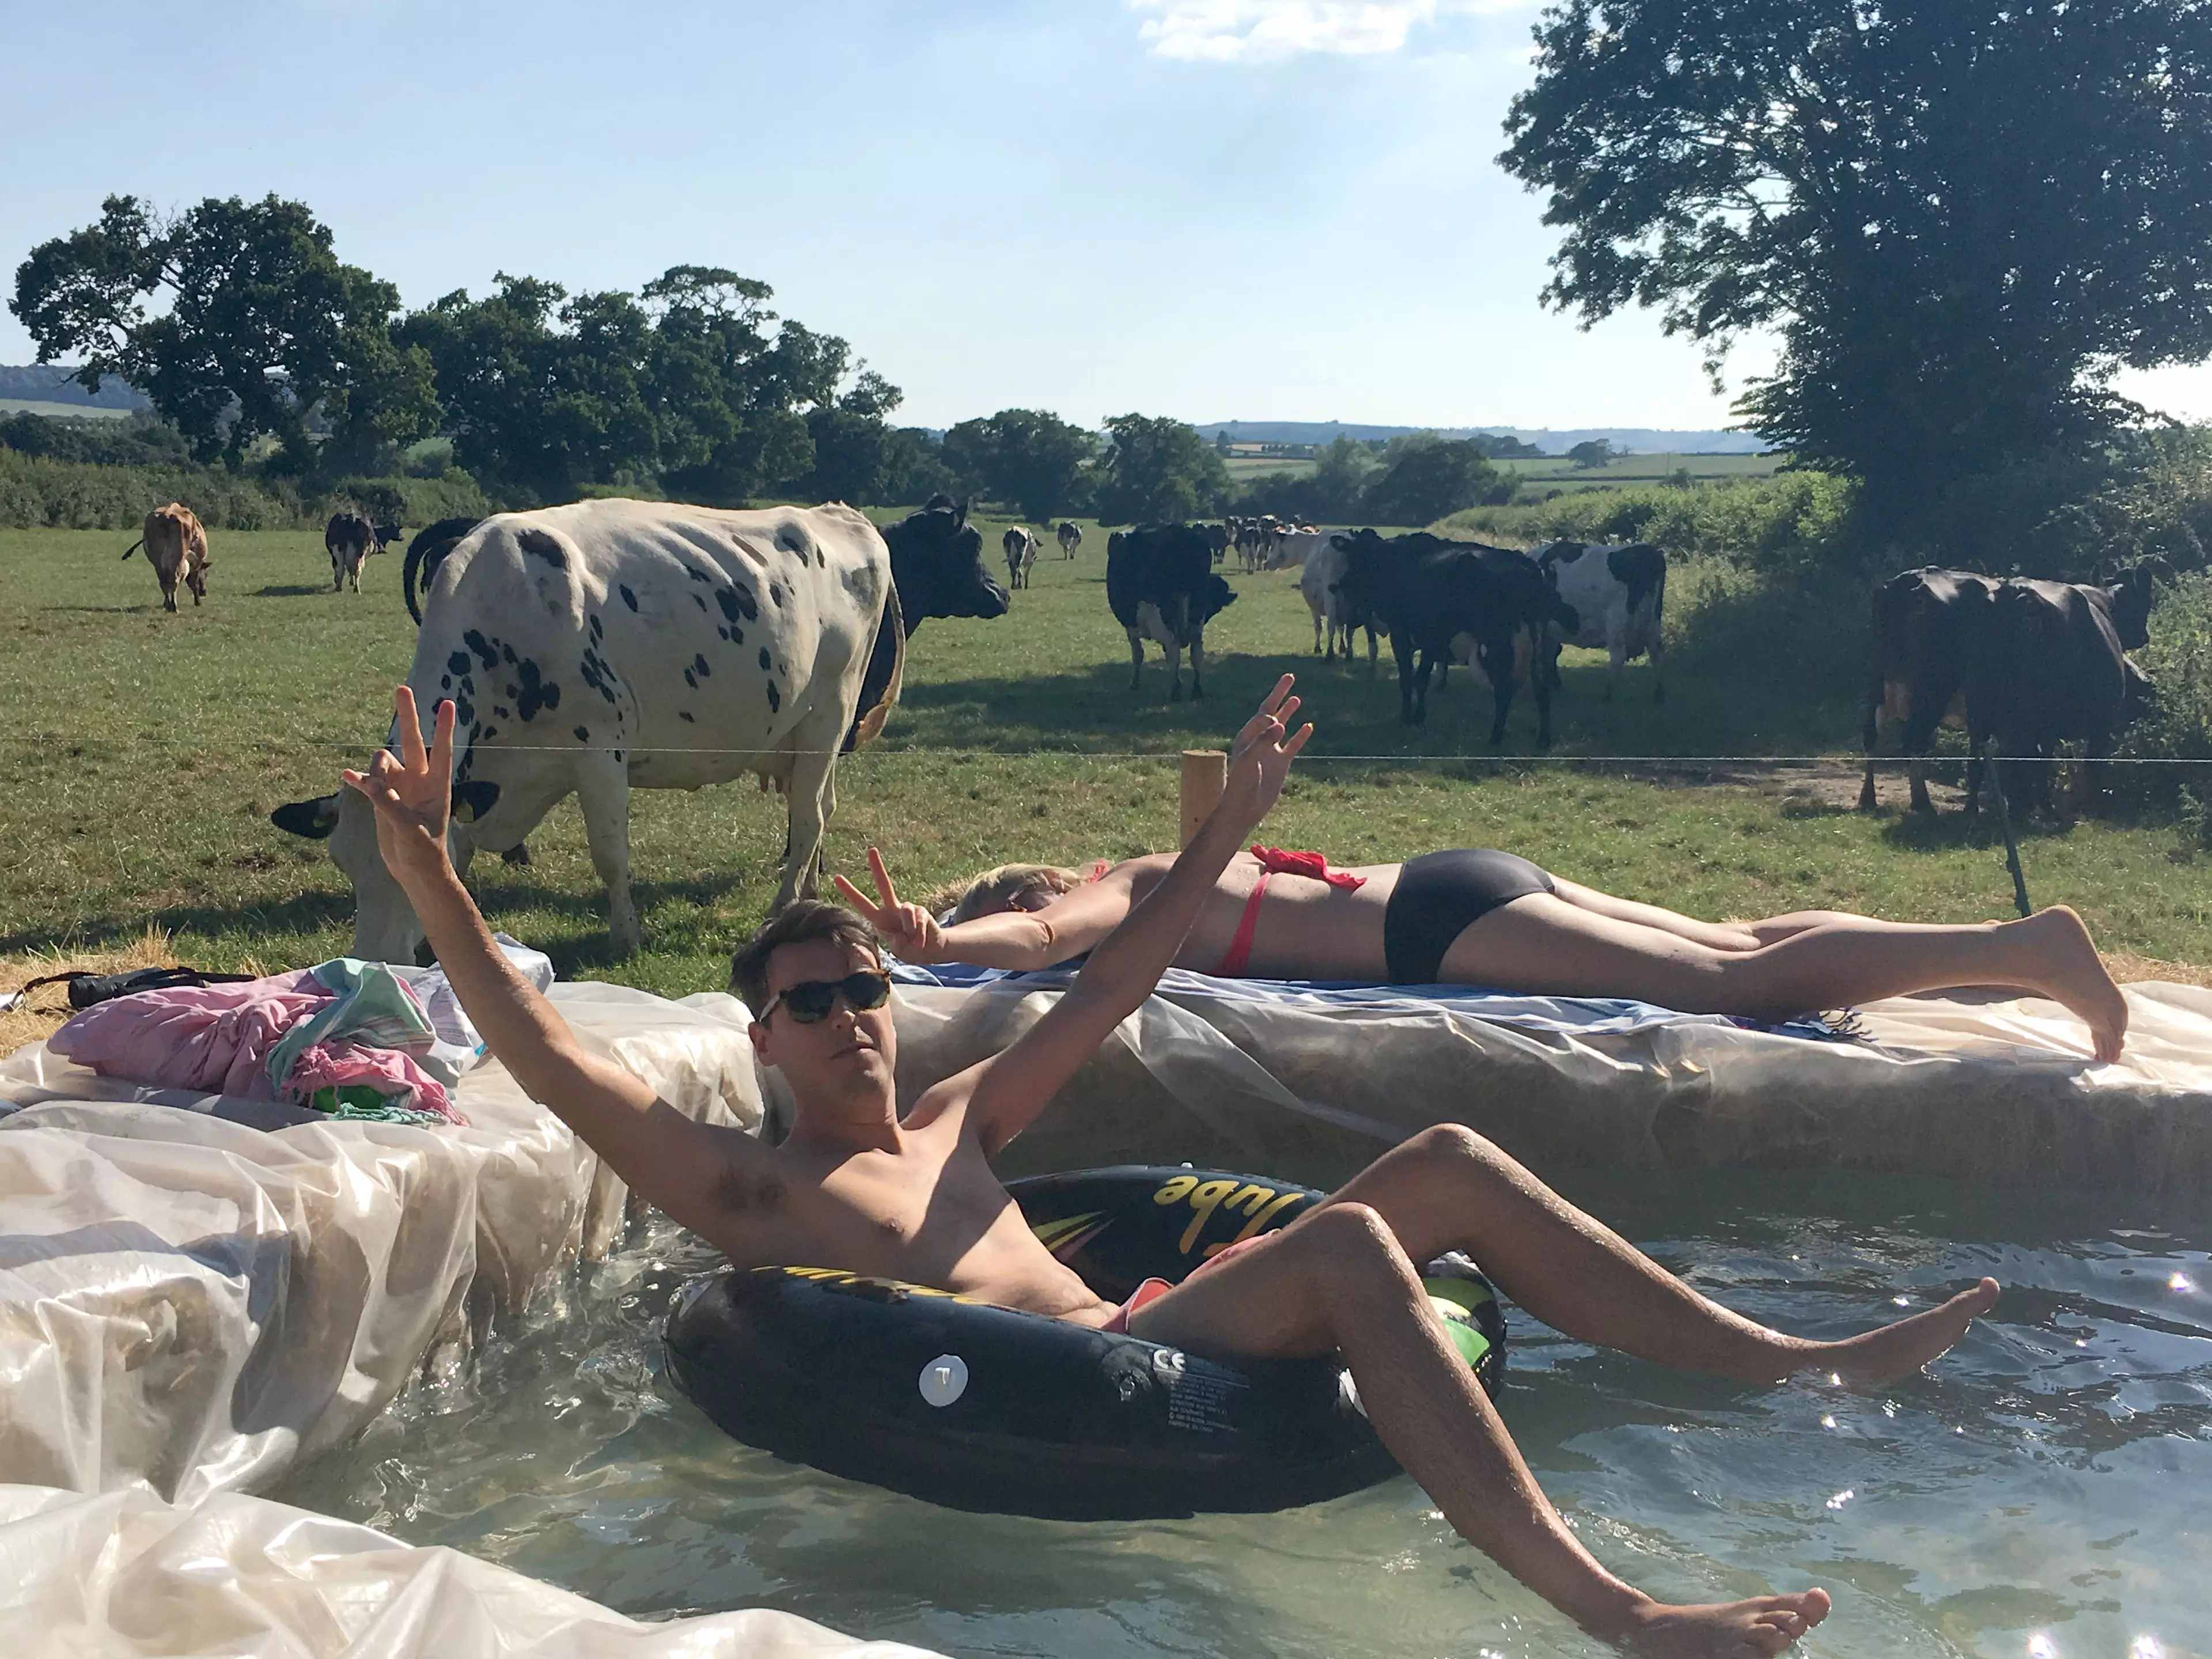 Ed and his family have been loving their makeshift pool with cows for company (